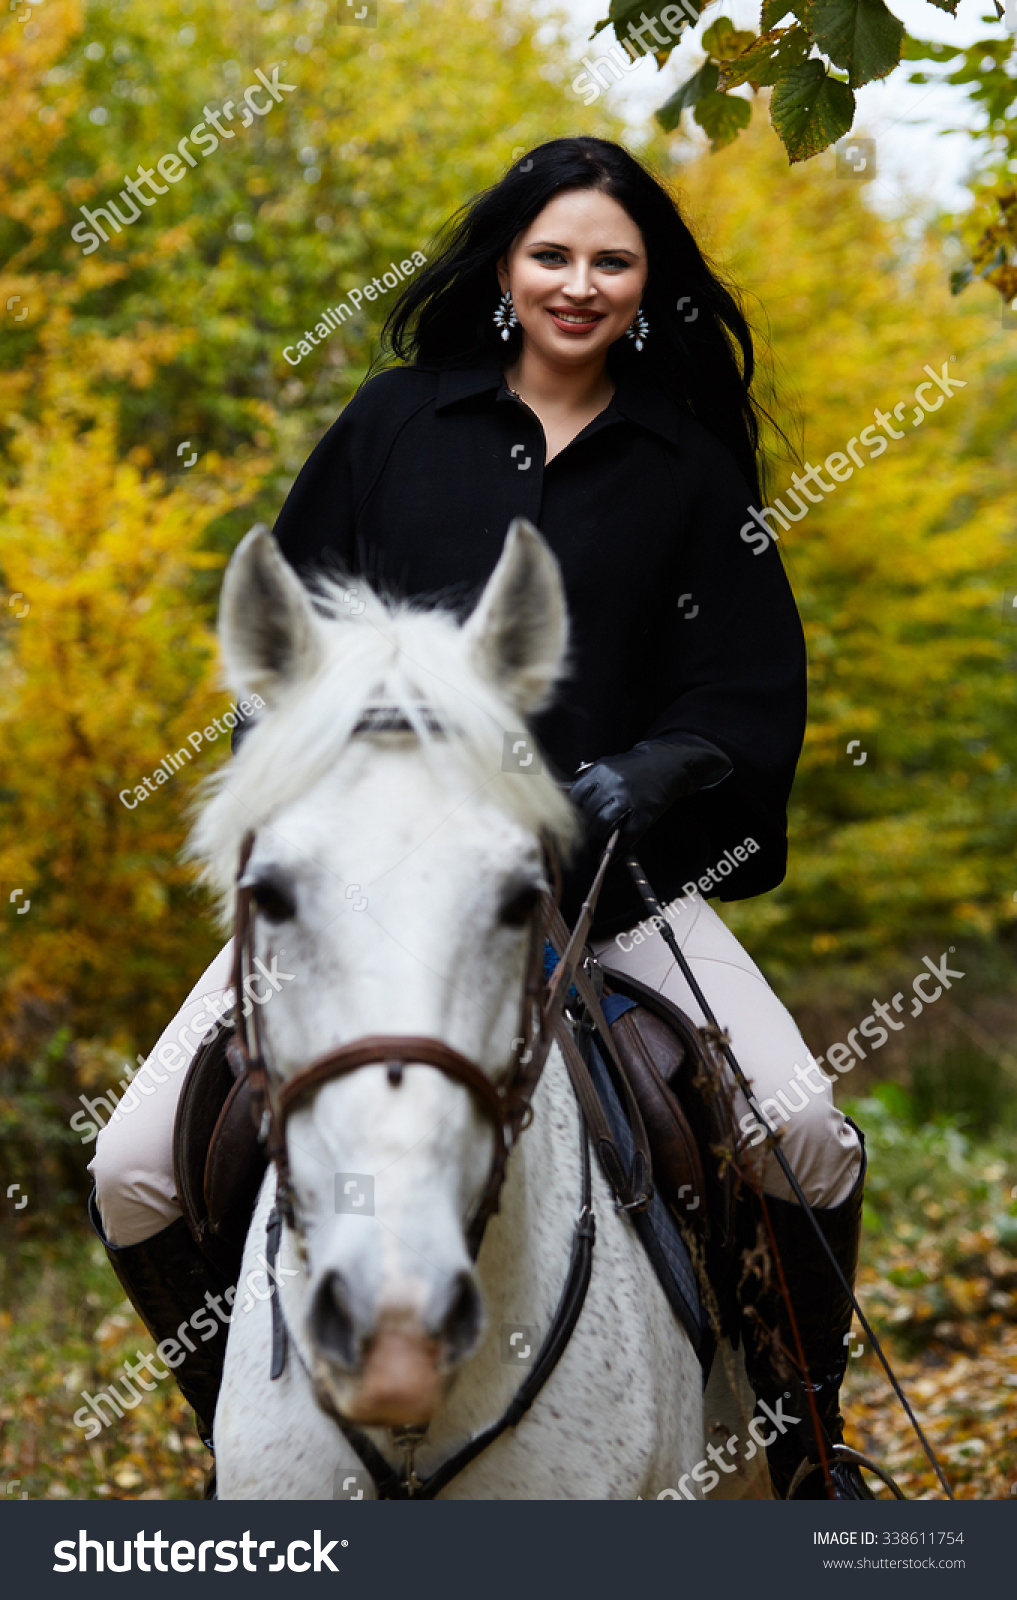 Best Girls Blowing Horses Stock Photos, Pictures & Royalty 